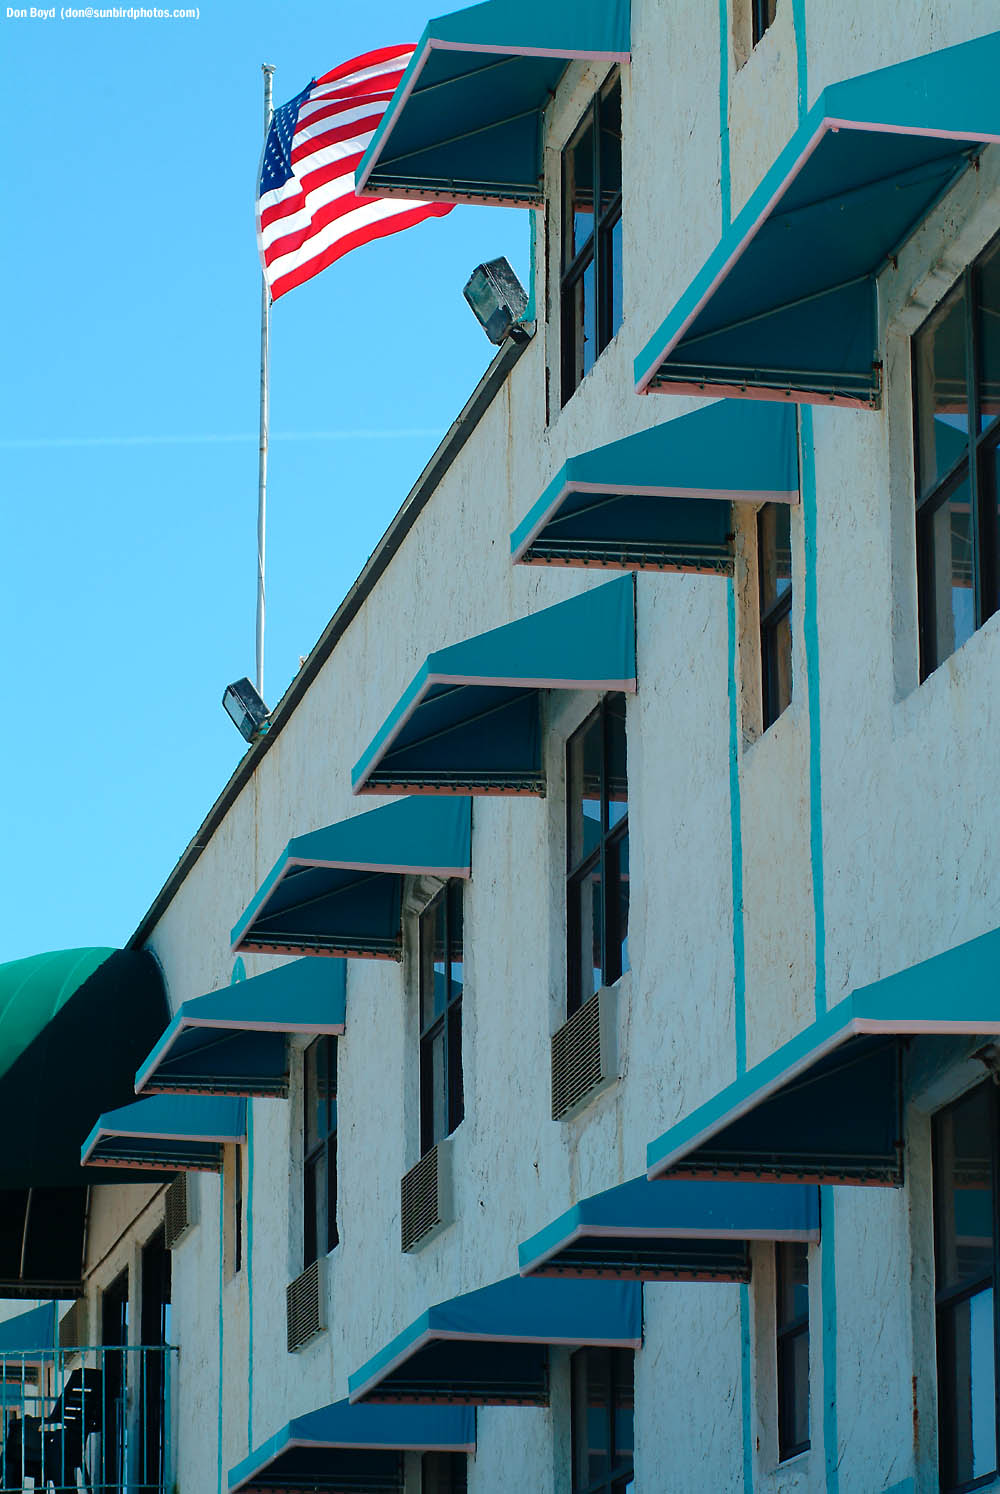 Motel  flag  and  canopies